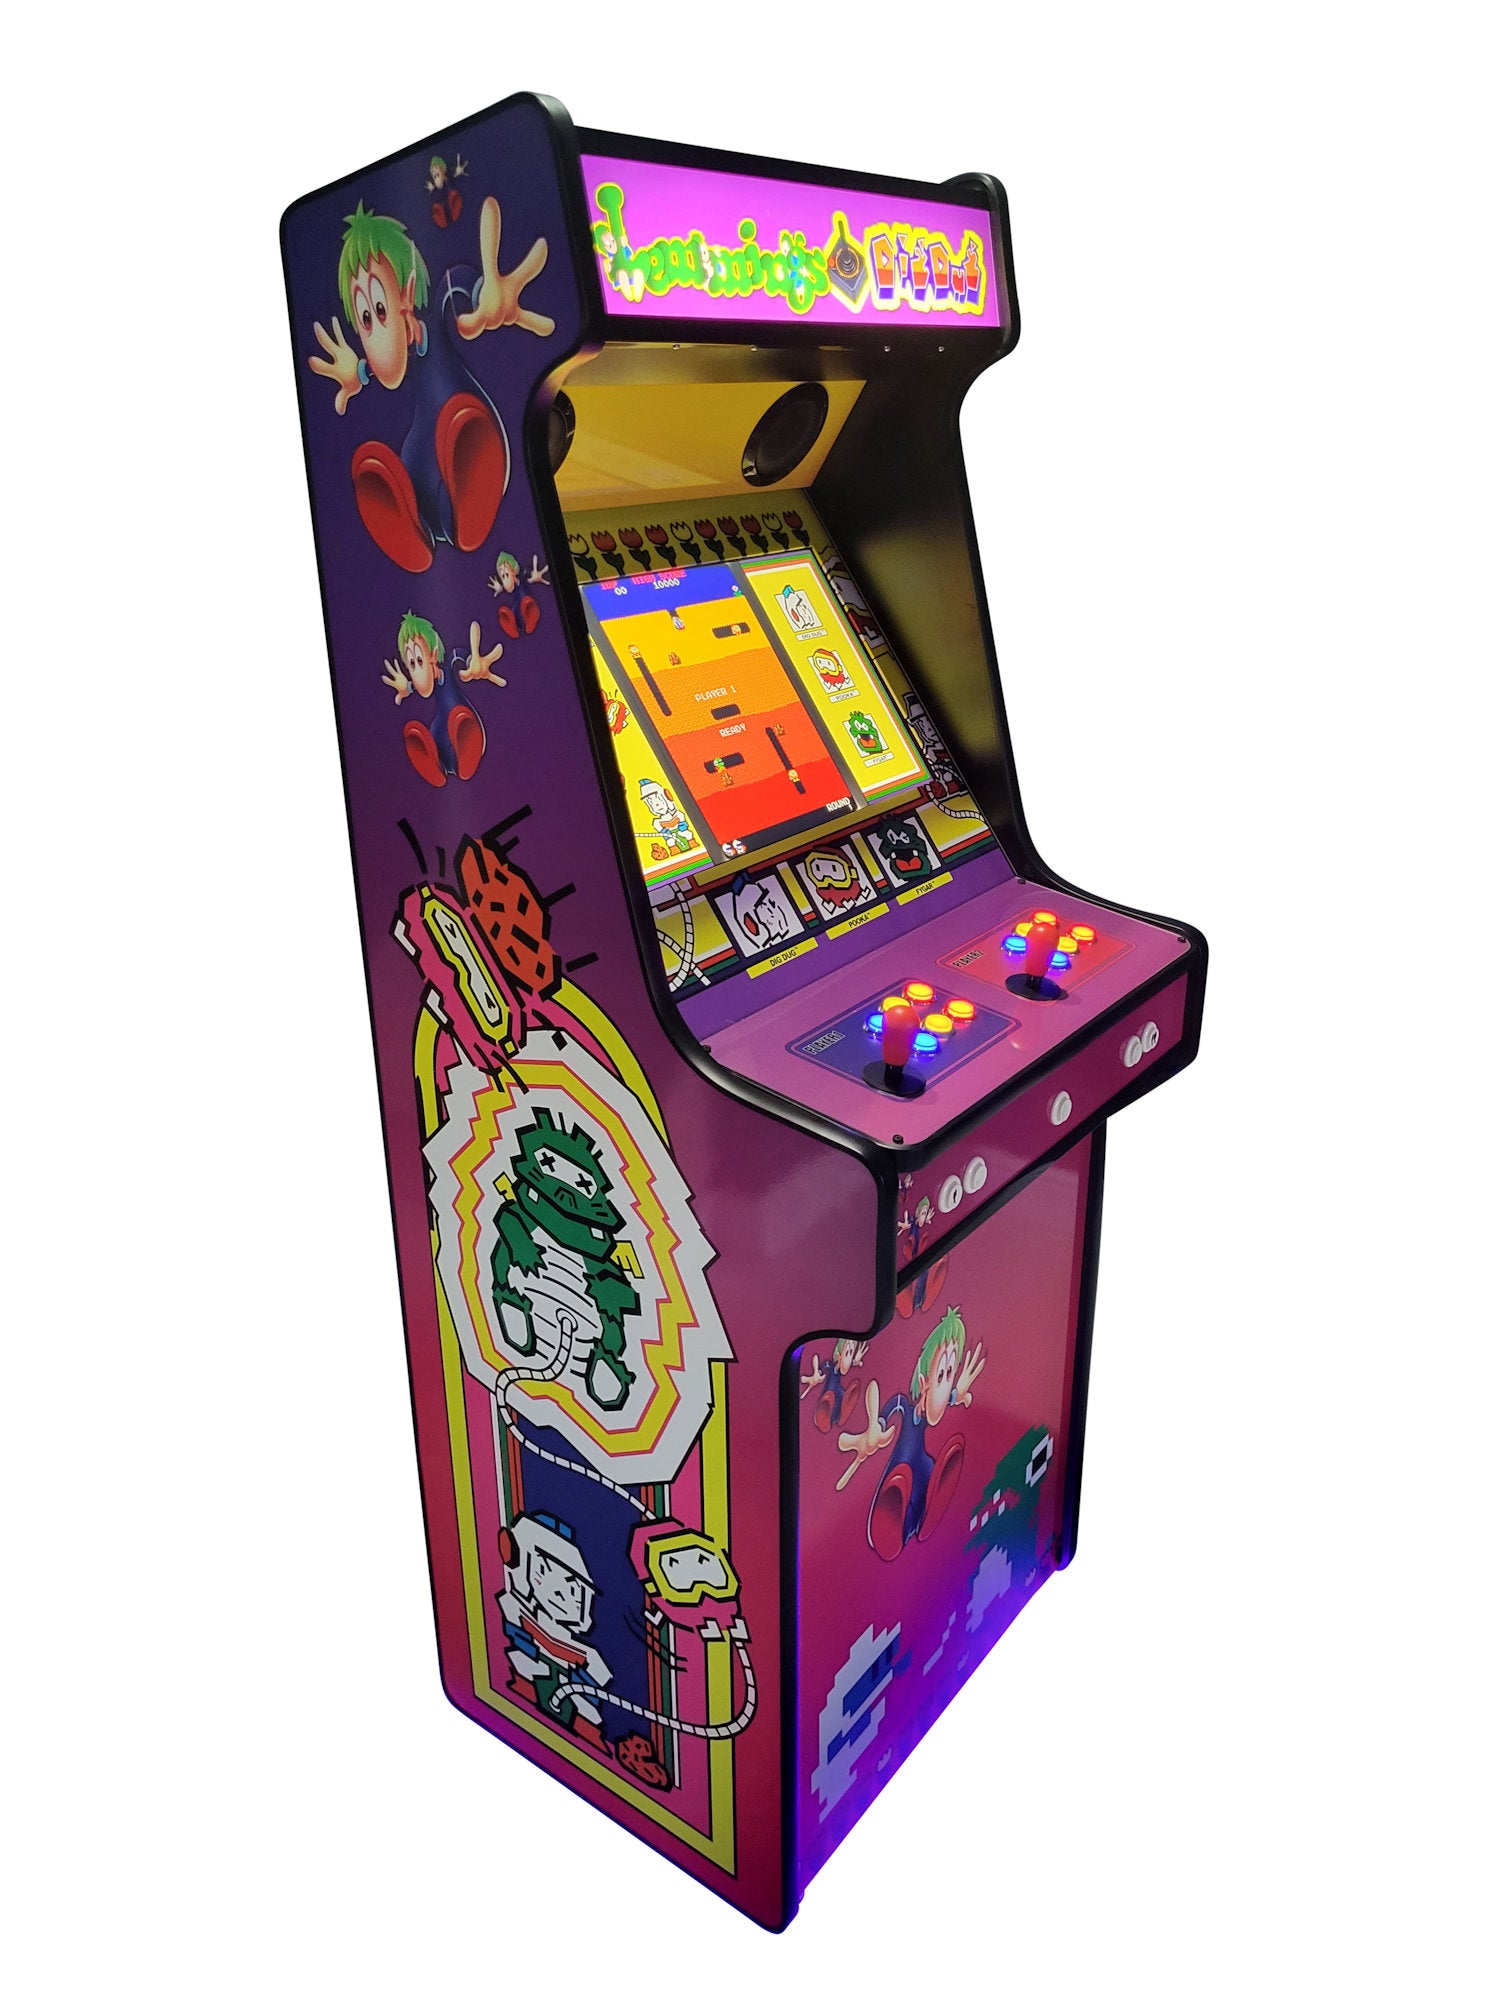 Dig Dug Lemmings style arcade machine with 15,000 games.